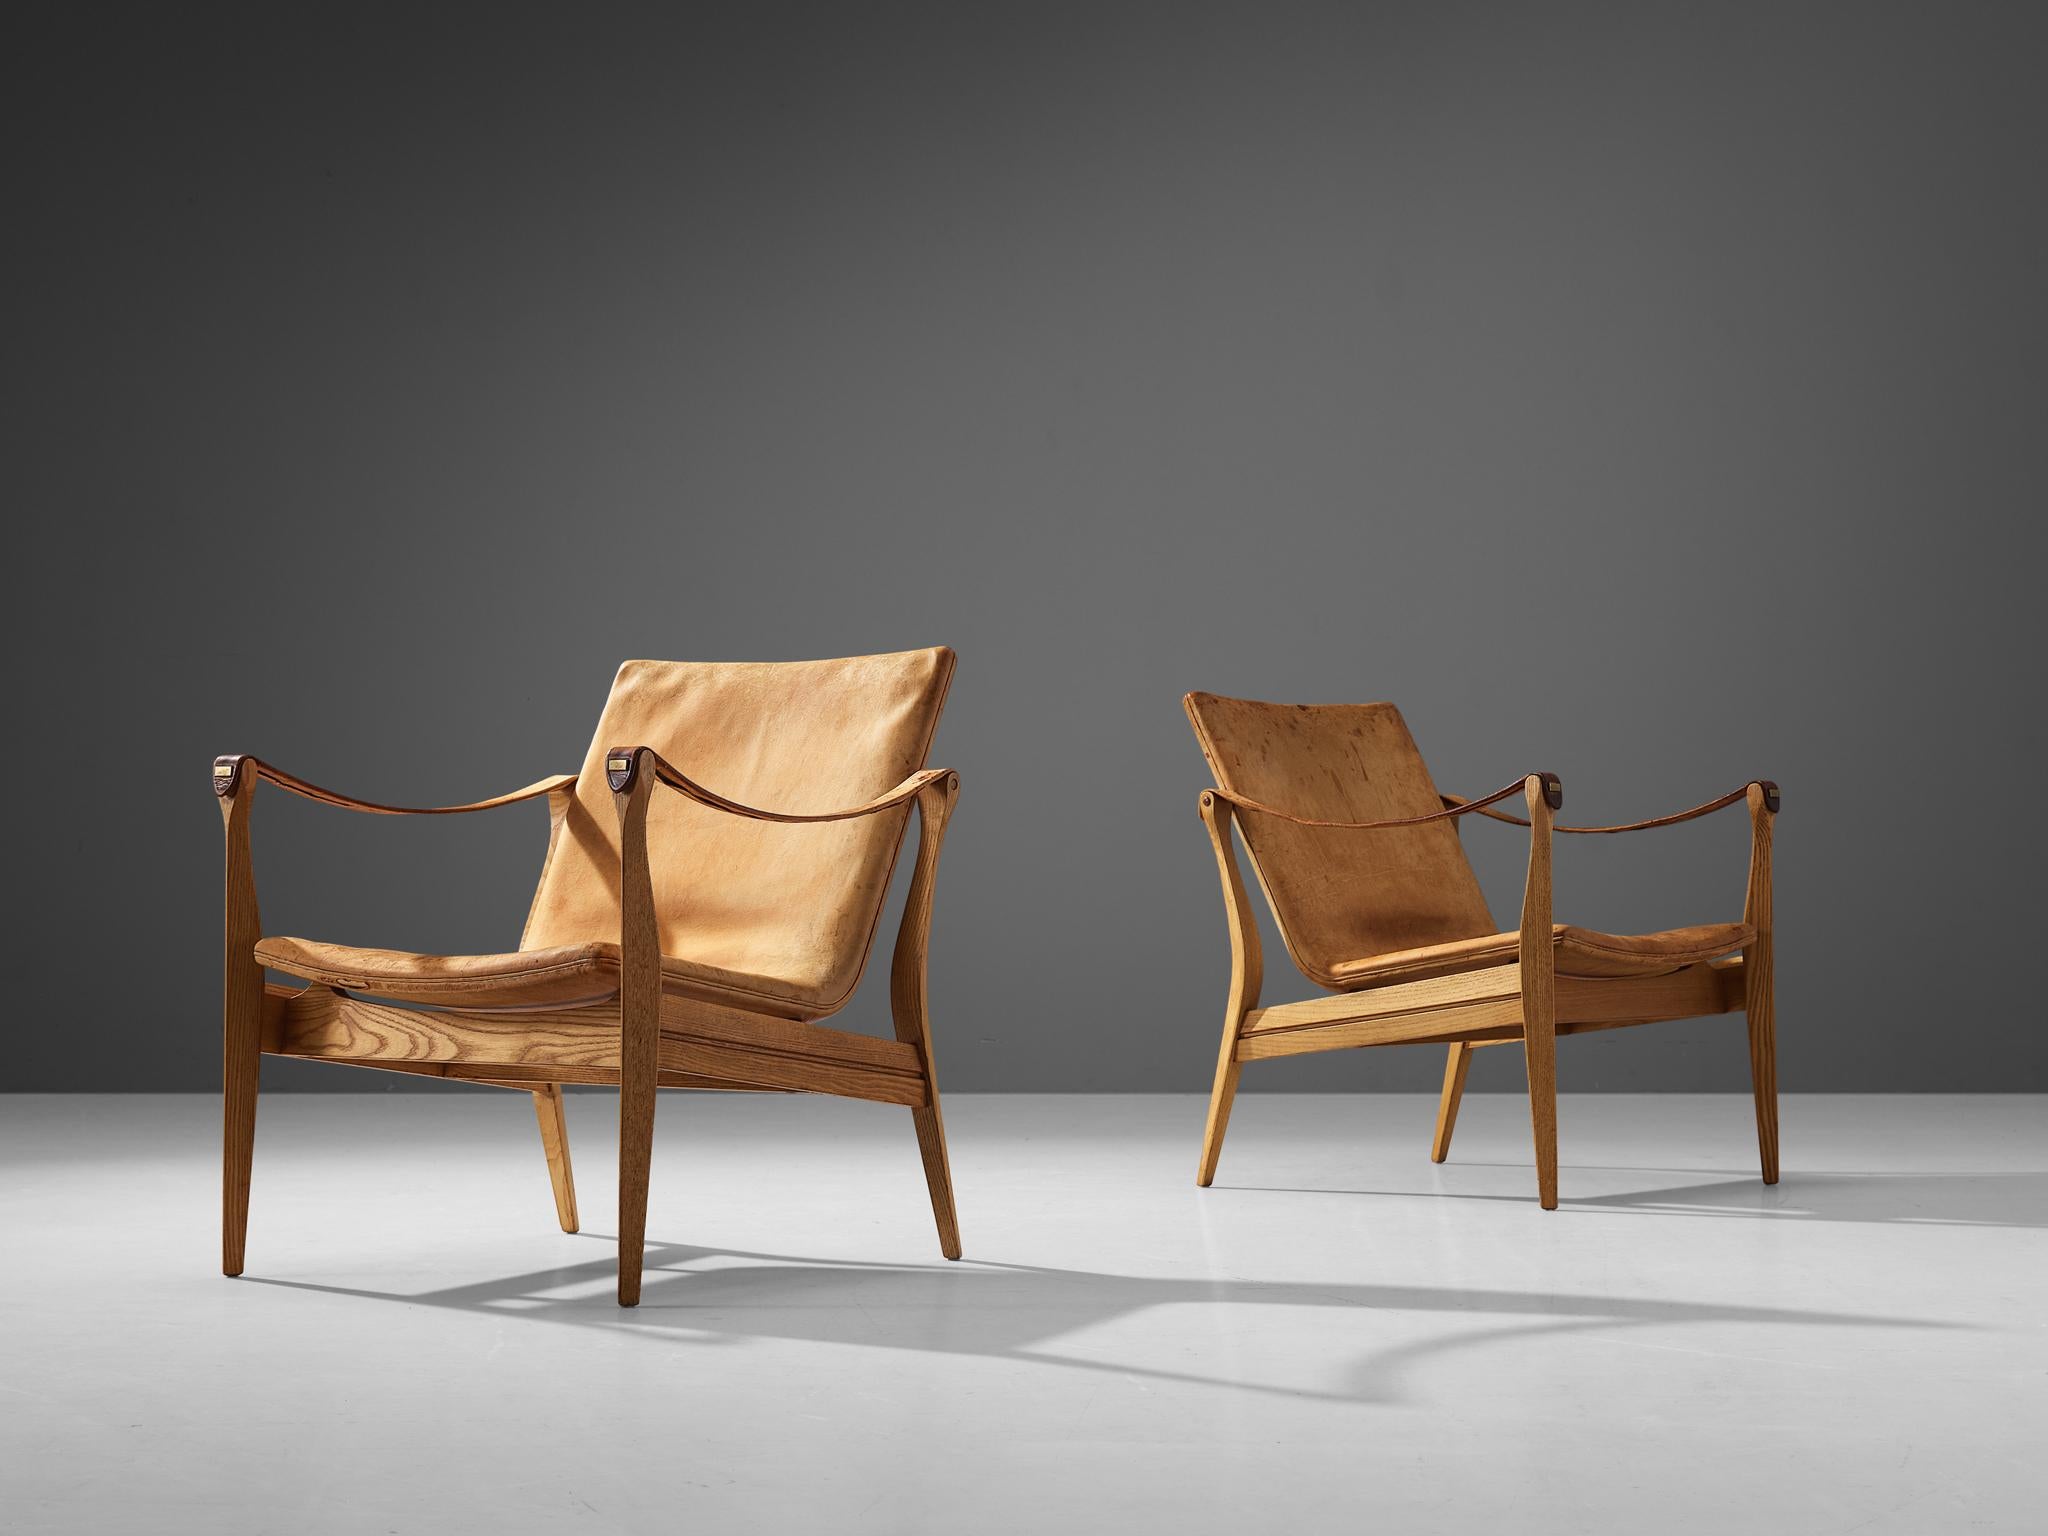 Karen & Ebbe Clemmensen for Ludvig Pontoppidan, safari chairs, ash, leather, Denmark, 1959. 

Stunning pair of safari chairs by Karen & Ebbe Clemmensen for the Danish manufacturer Ludvig Pontoppidan. These chairs are designed in 1959 and contain a